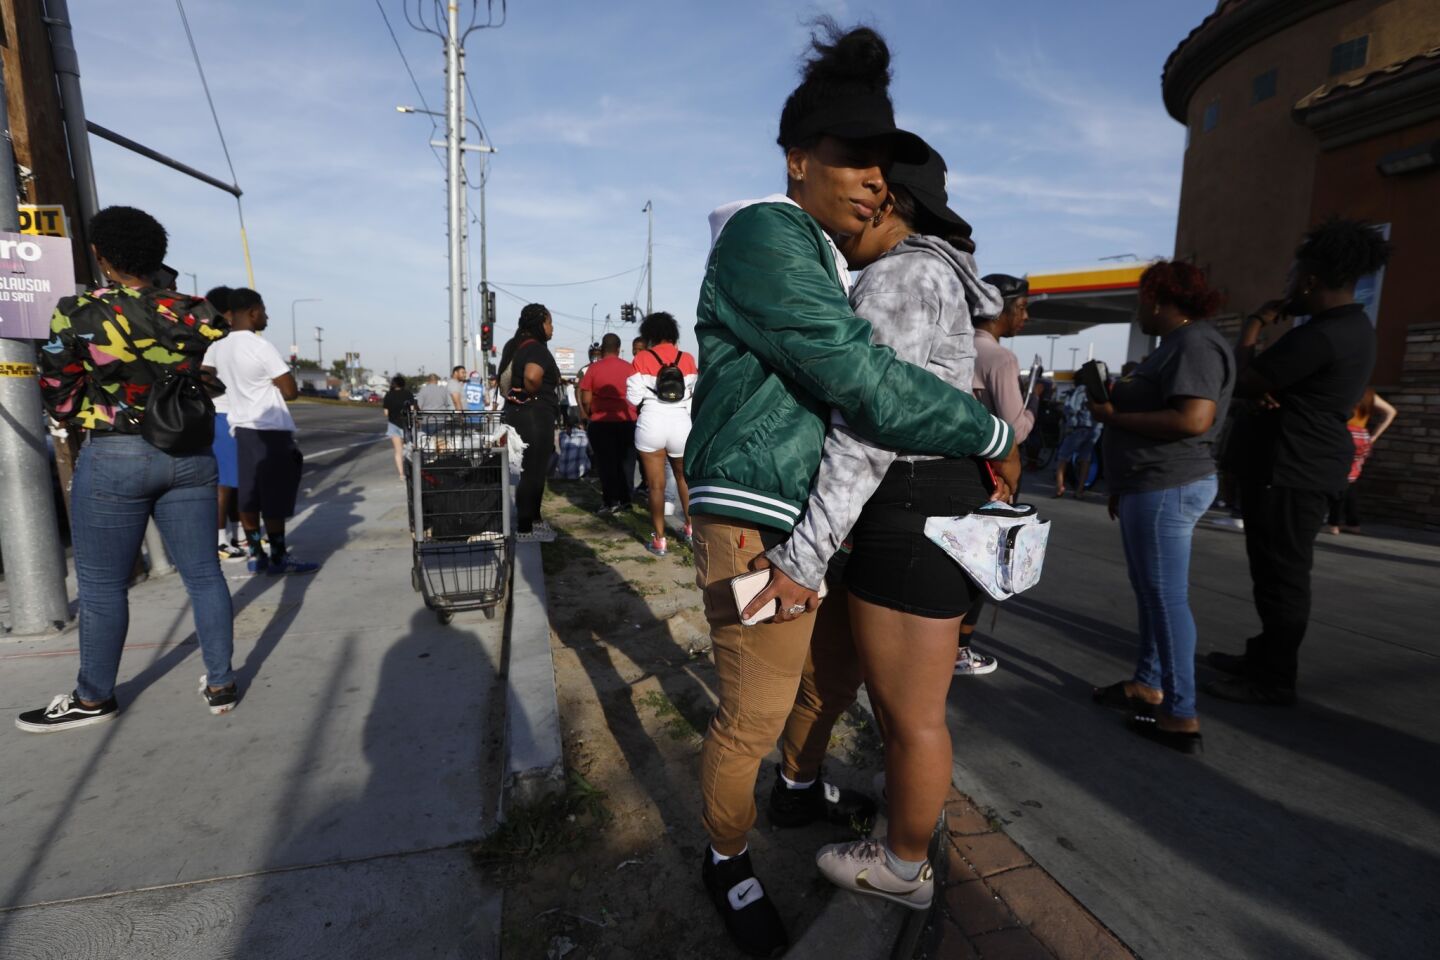 Utopia Kates, 27, in green jacket, comforts a friend over the shooting death of rapper Nipsey Hussle outside his clothing store in South Los Angeles.